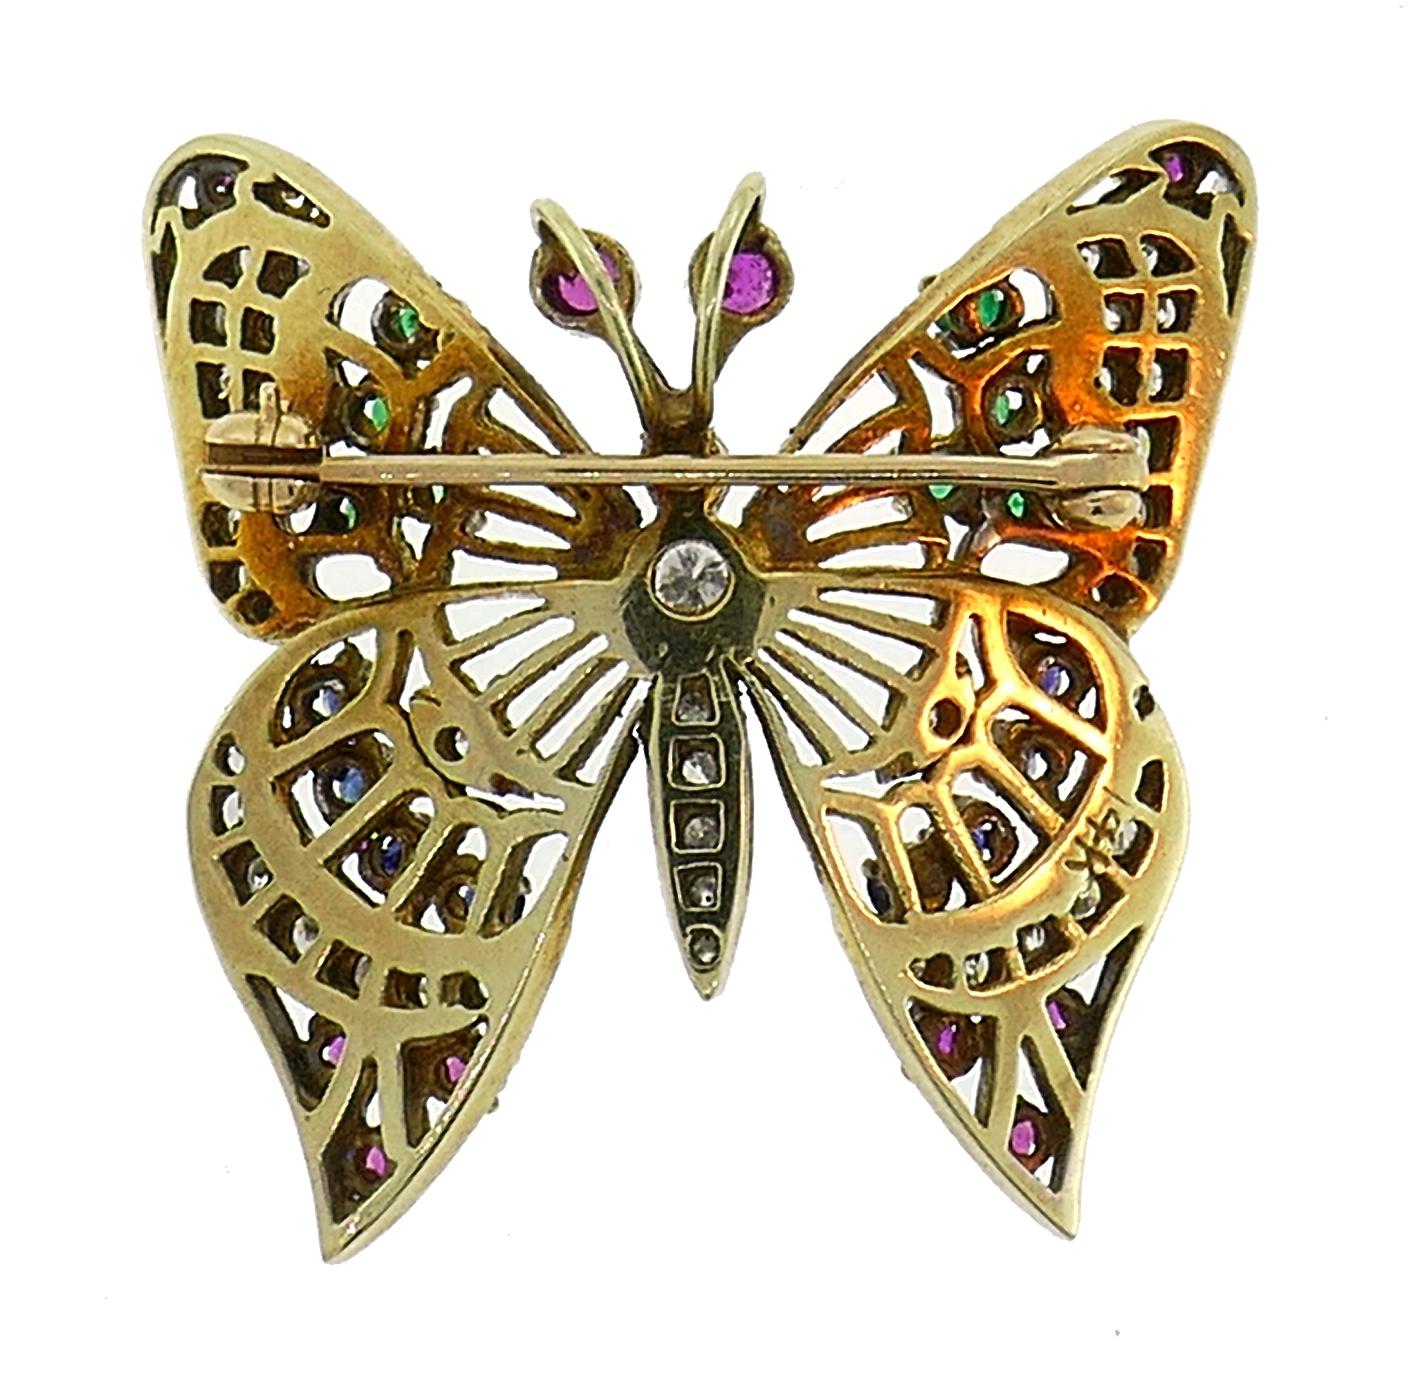 Lovely colorful butterfly pin created in the 1950s. 
Made of 14 karat (stamped) yellow and white gold, set with diamonds, rubies, sapphires and emeralds. The diamonds are single and Old European cuts, G-H color VS clarity, total weight approximately